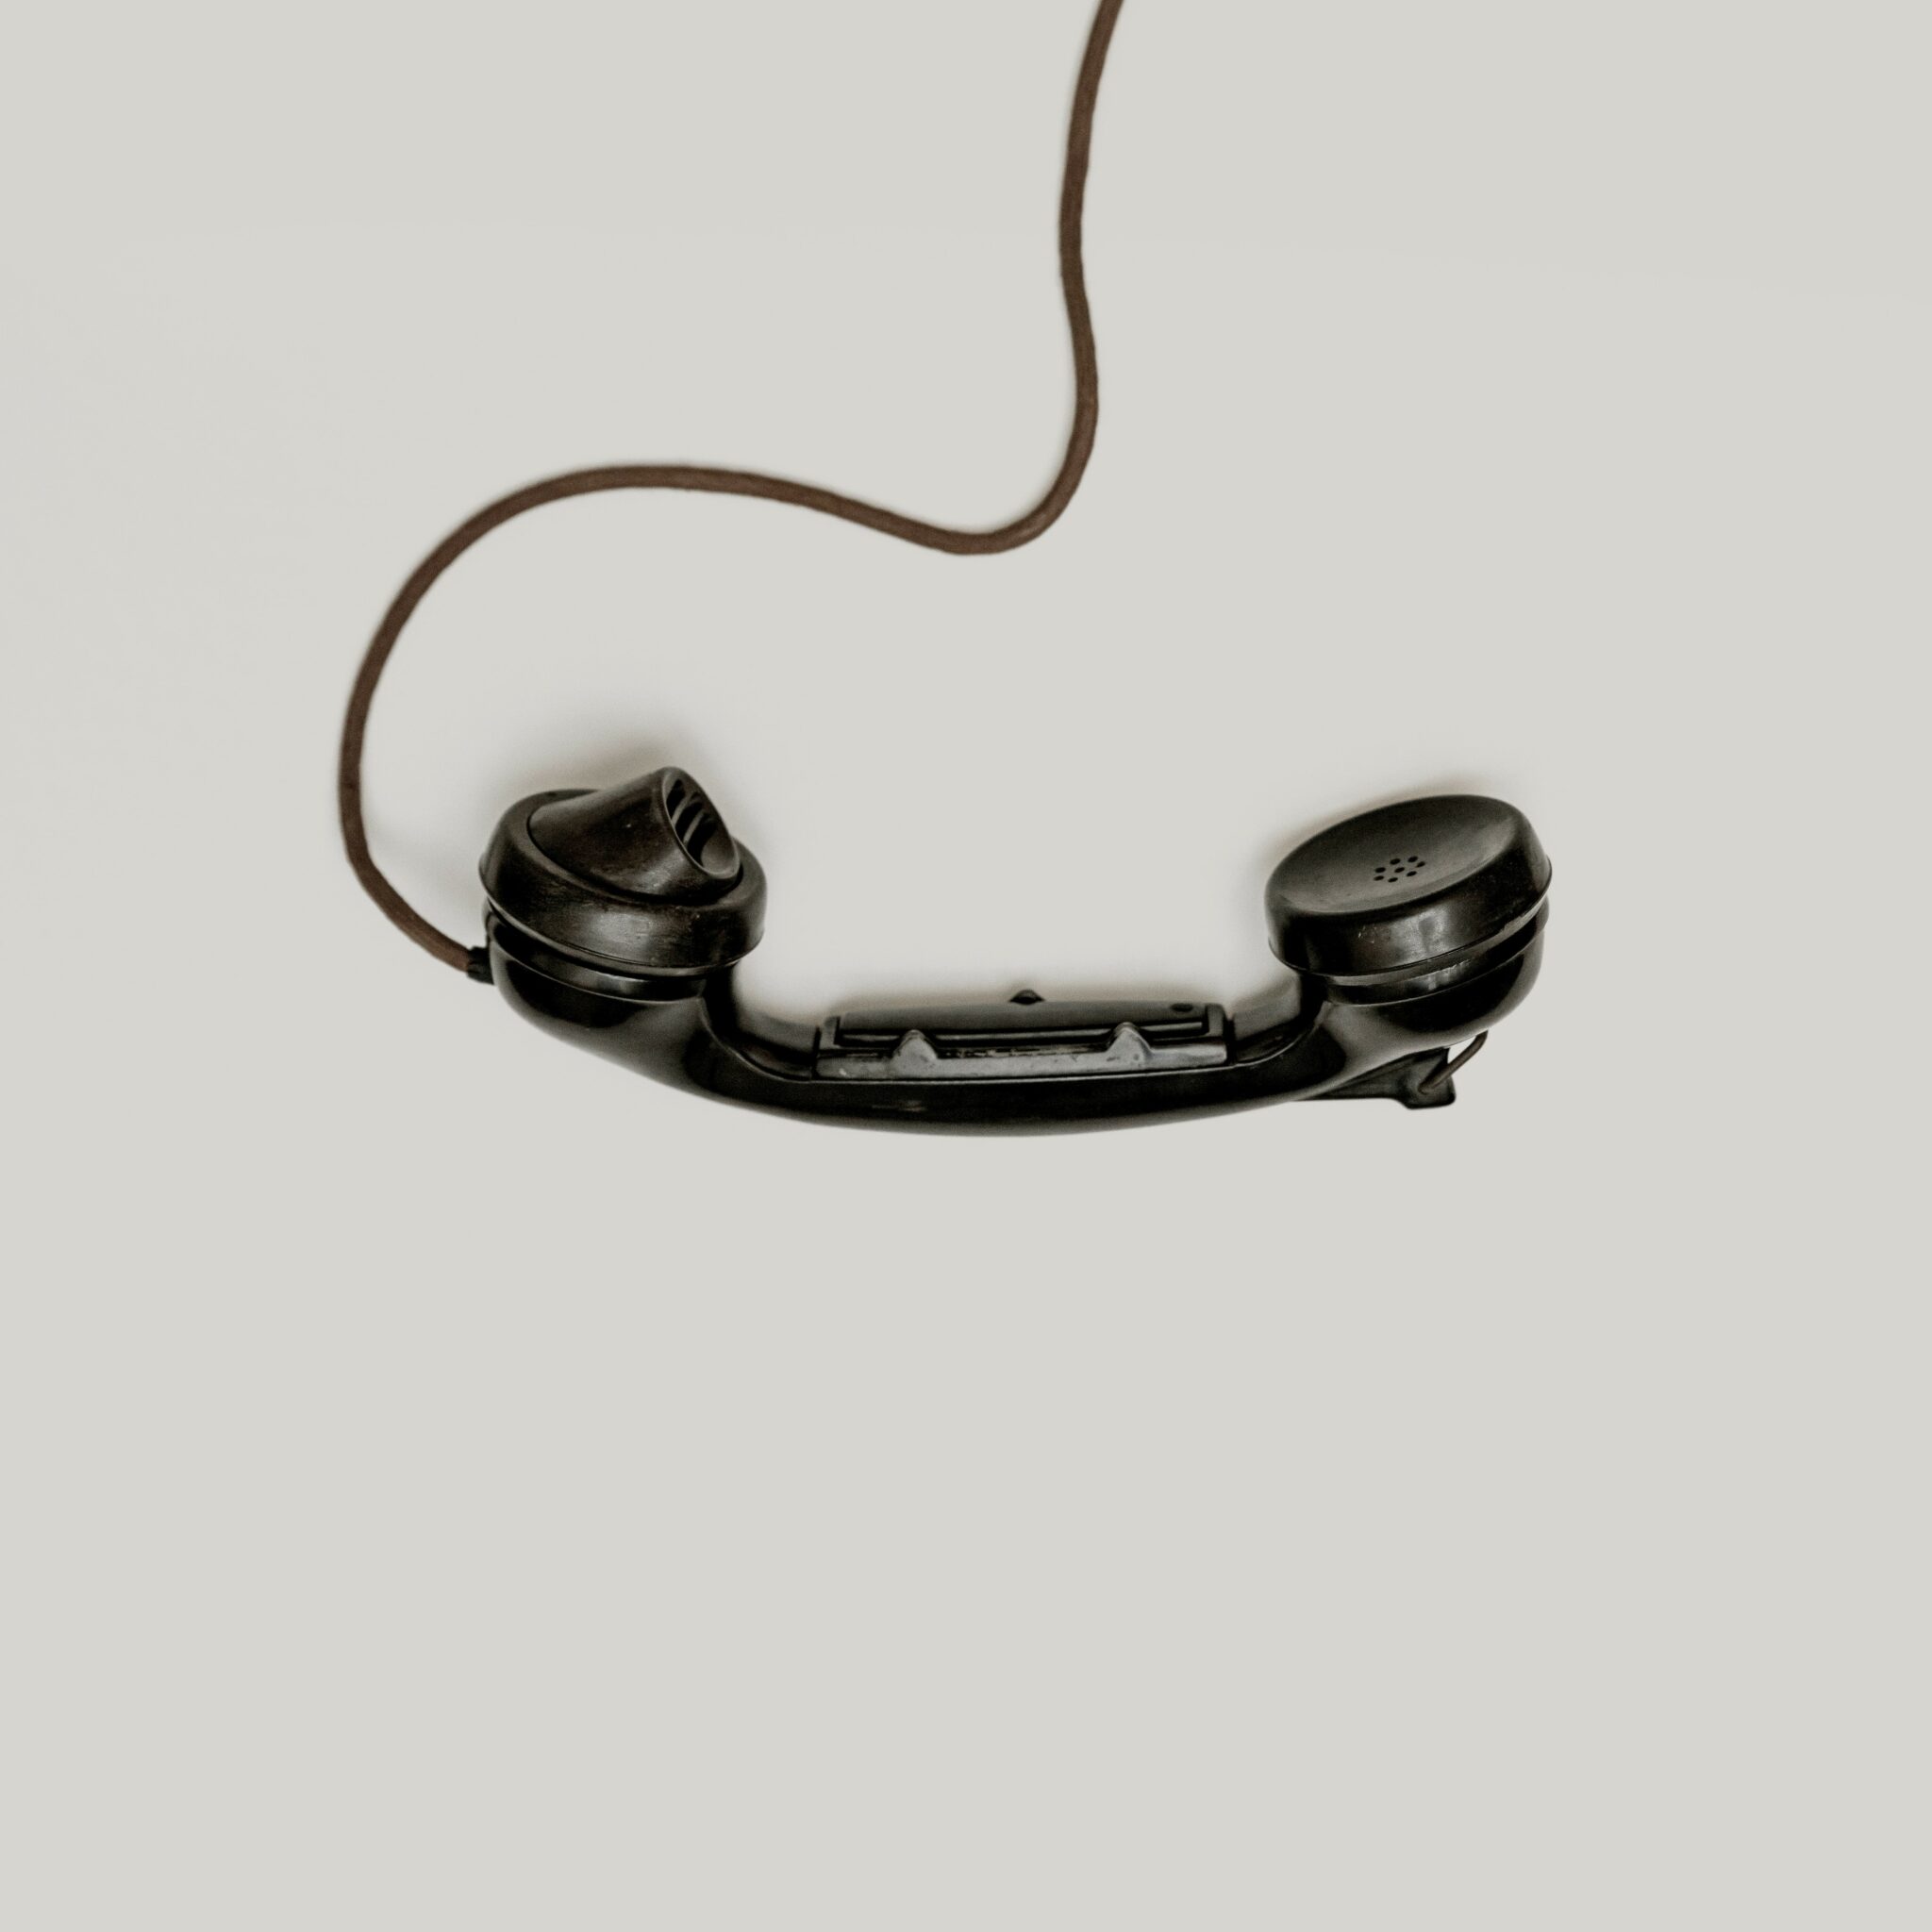 Black, old fashioned phone dangling by a chord on a grey background.